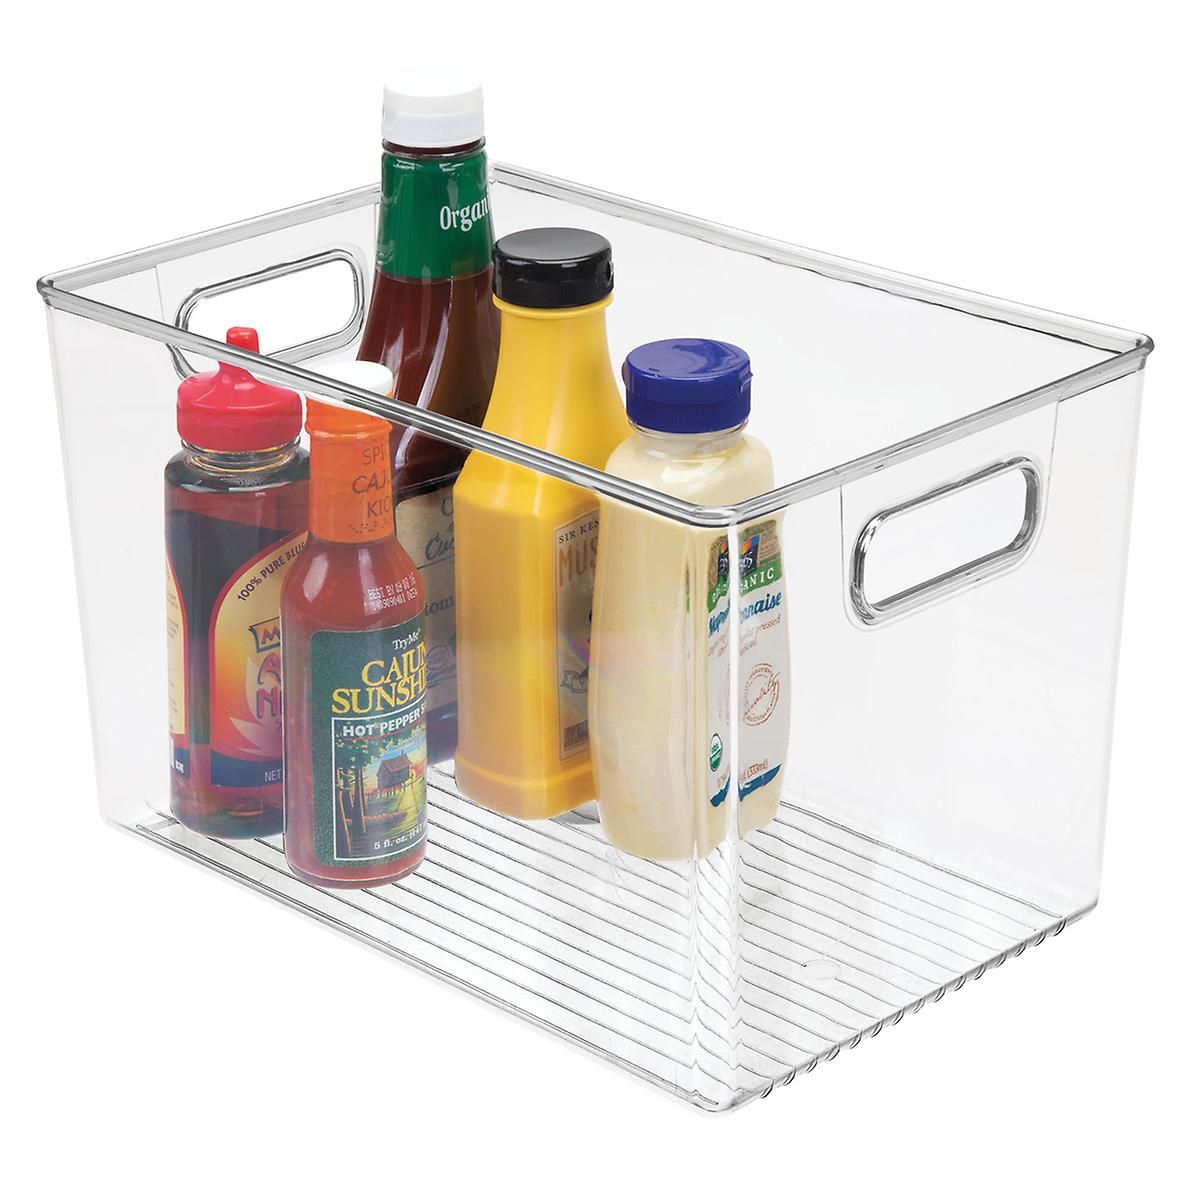 iDESIGN Linus Medium Kitchen Bin Clear | The Container Store